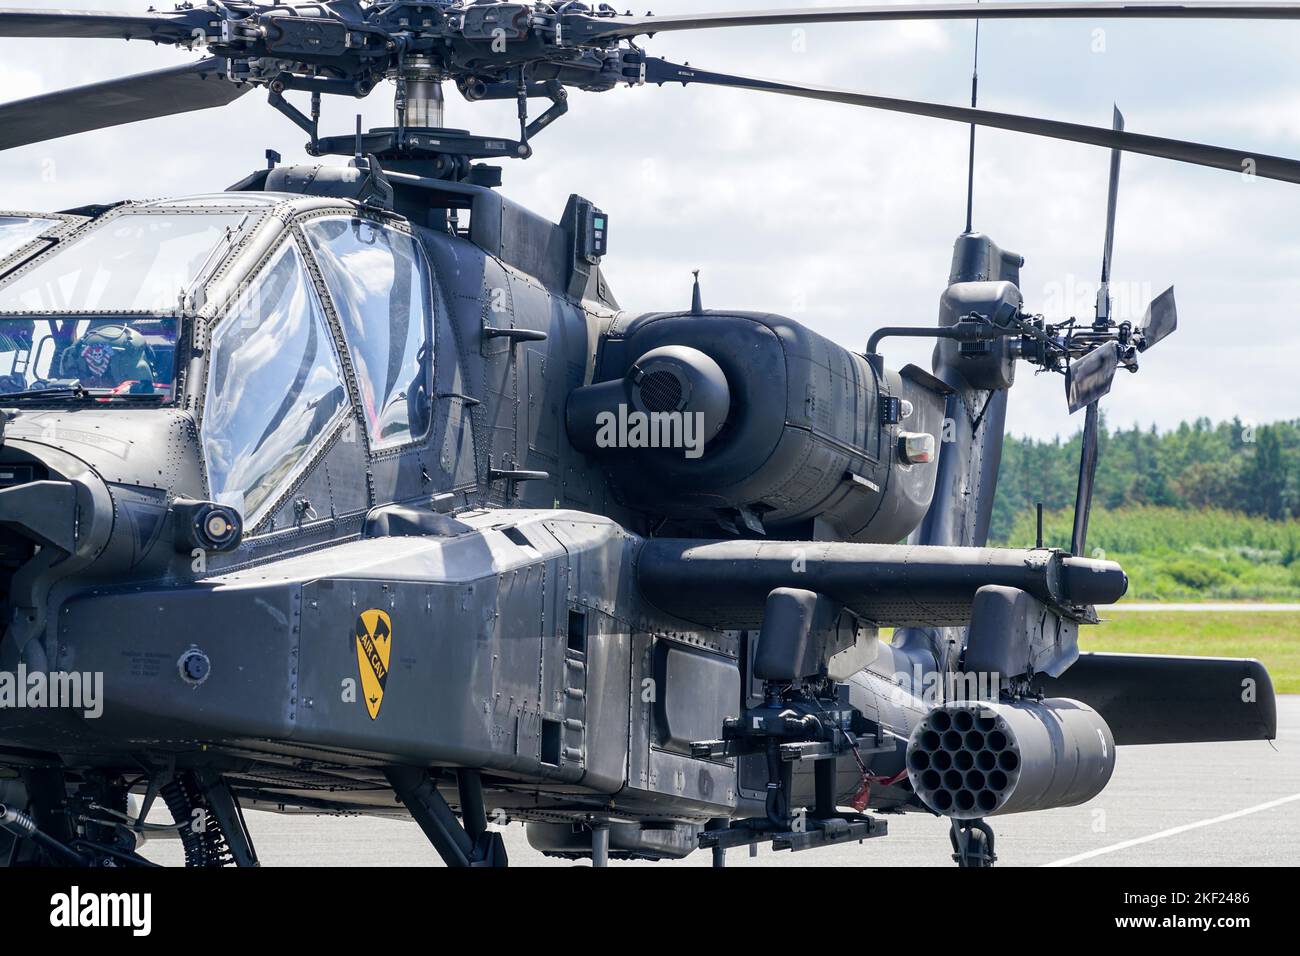 Liepaja, Latvia - August 07, 2022: AH-64D Apache attack helicopter from United States army after landing at the airport runway Stock Photo